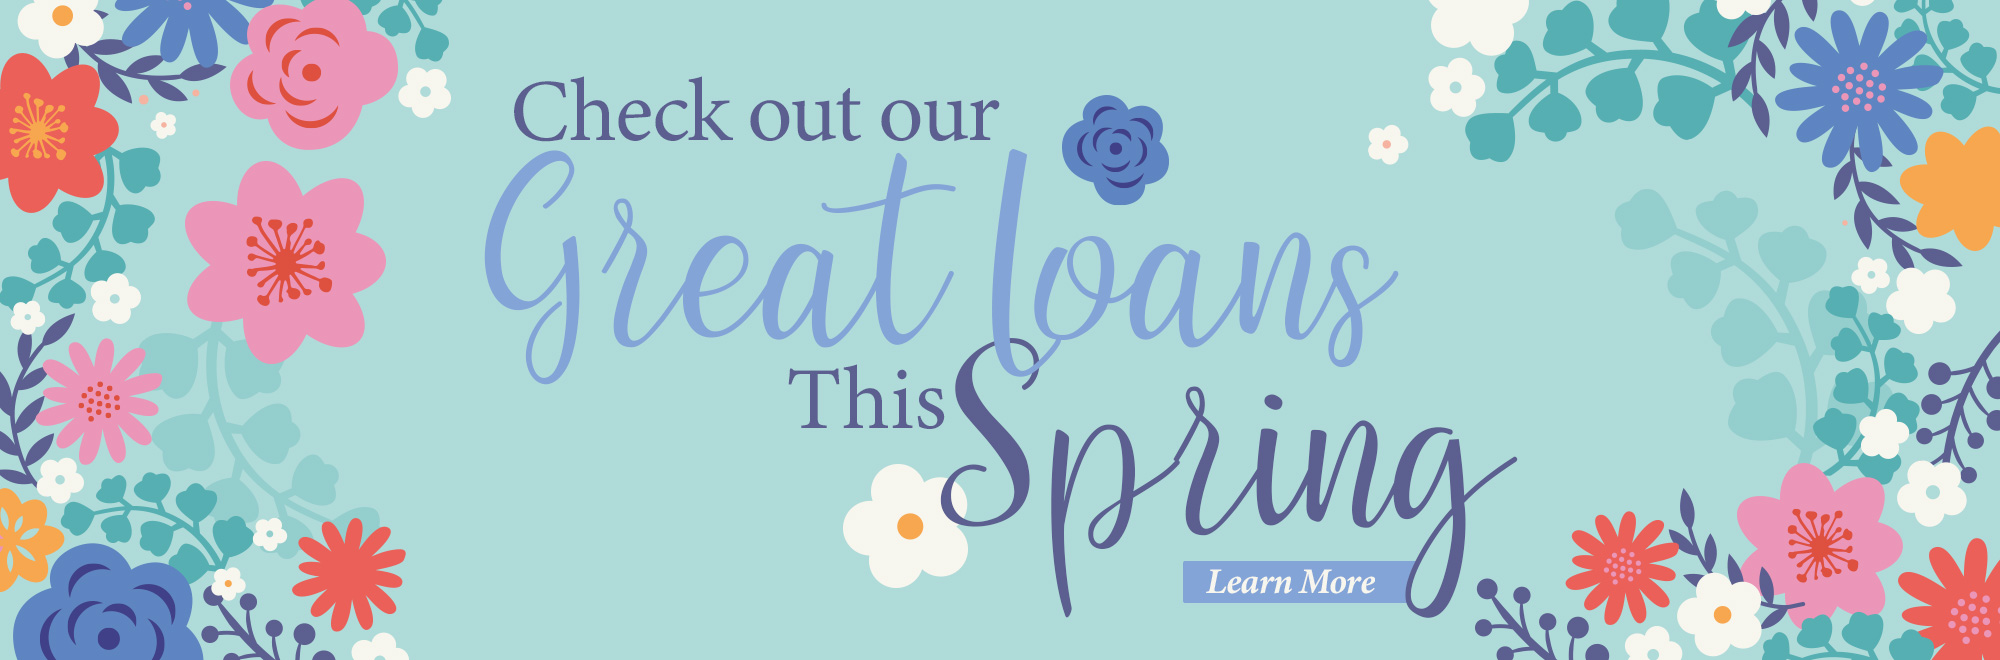 Check out our great loans this spring!